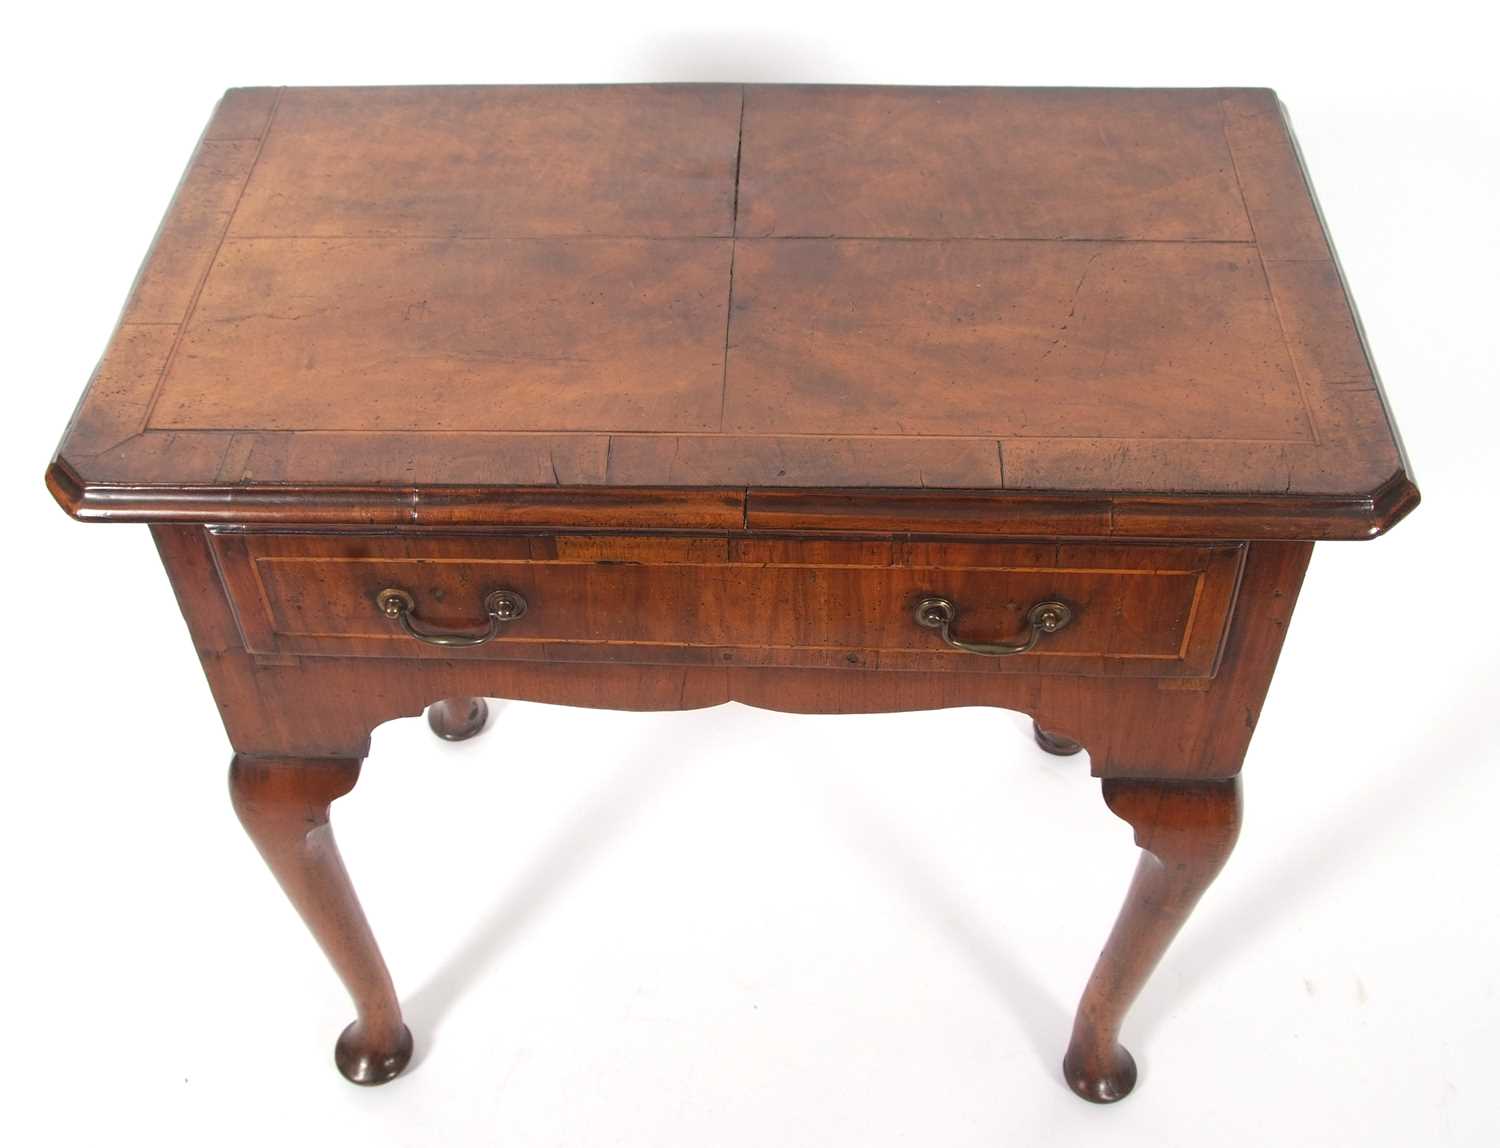 An early 18th Century walnut low boy, the top with quartered veneers and canted front corners over a - Image 5 of 10